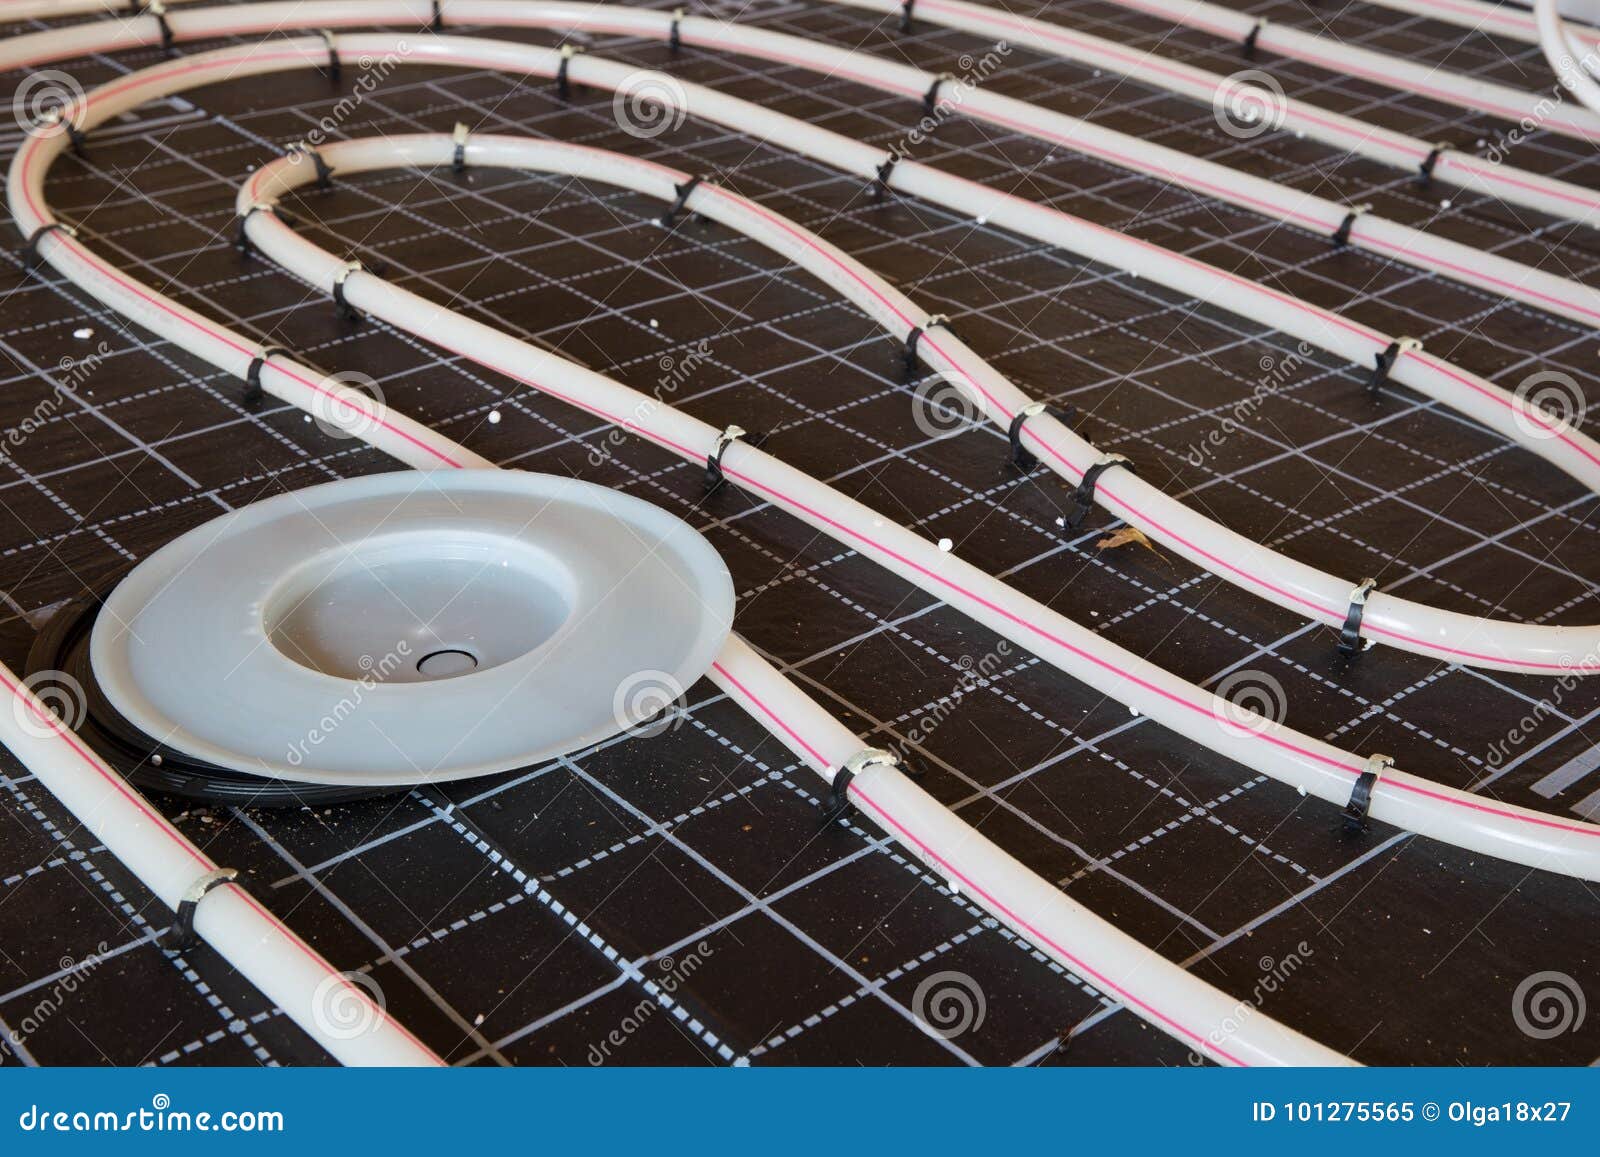 Radiant Floor Heating System Stock Image Image Of Plastic Pipe